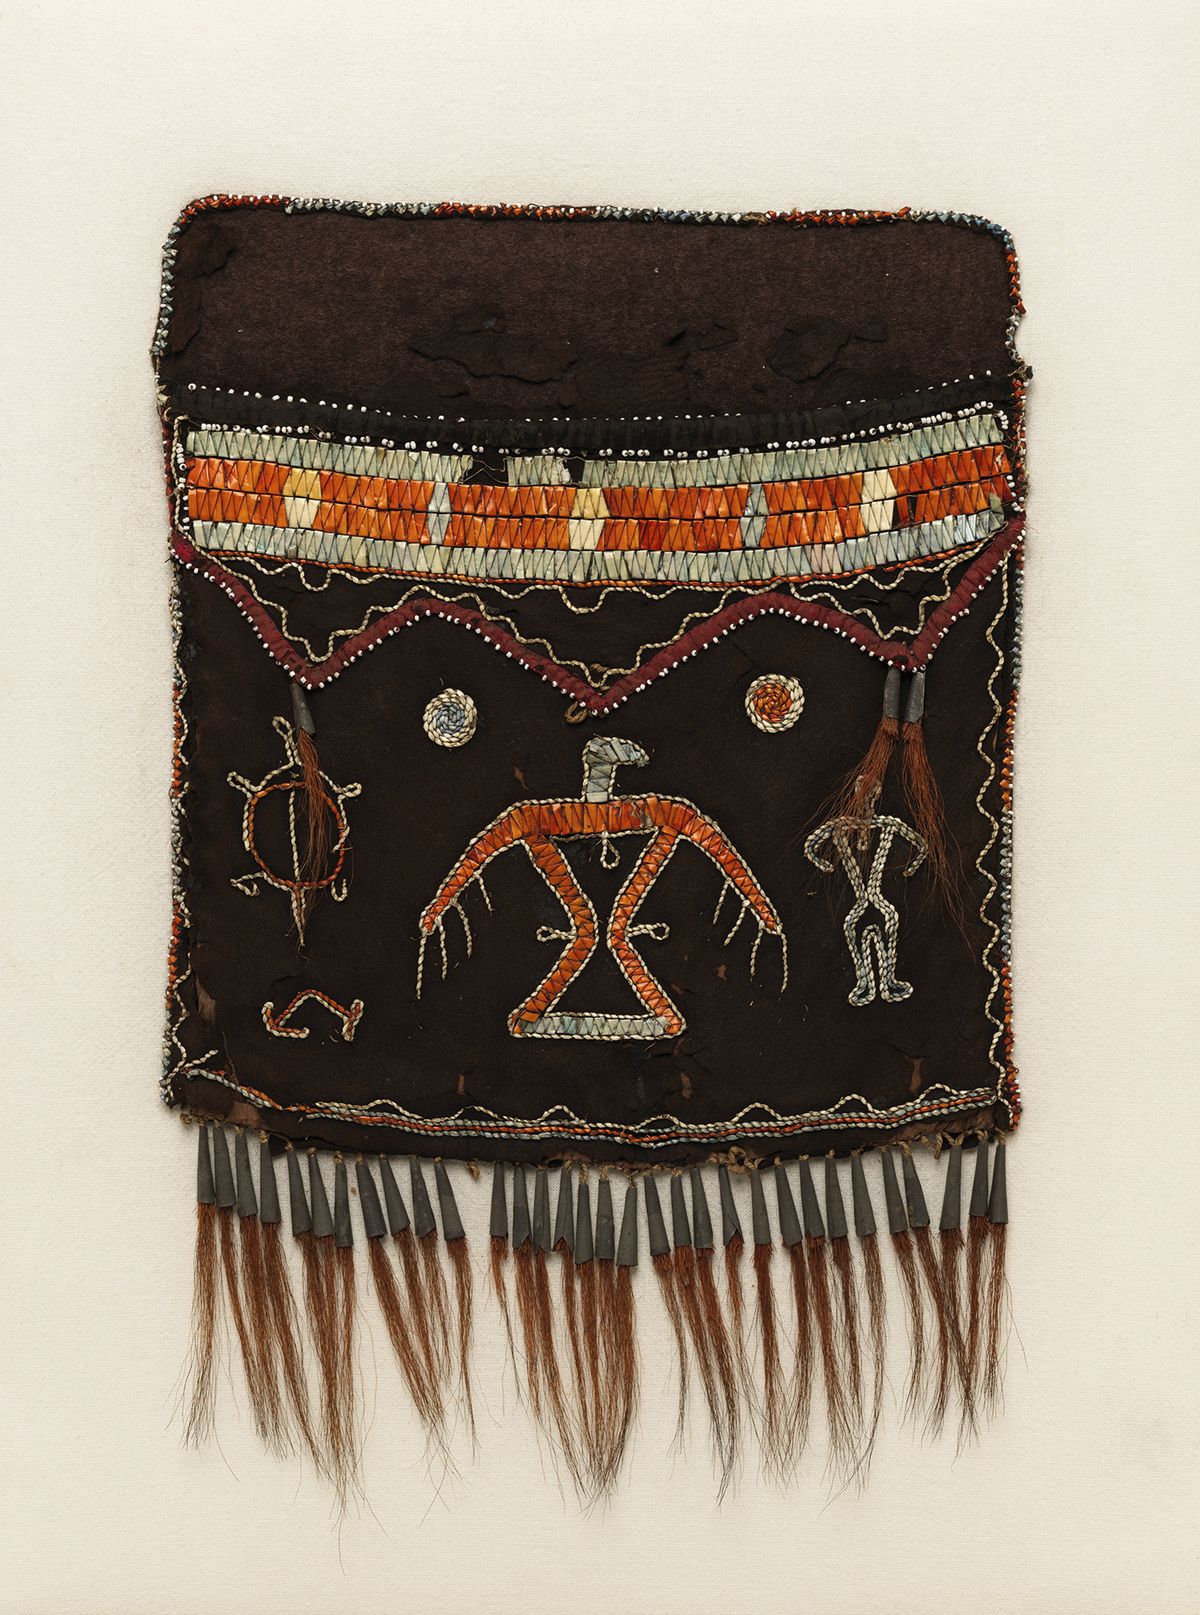 This photo provided by The Metropolitan Museum of Art shows a shoulder bag that is part of the exhibit “Art of Native America: The Charles and Valerie Diker Collection,” which runs through Oct. 6, 2019 at the museum in New York. | Bruce Schwarz/The Metrop